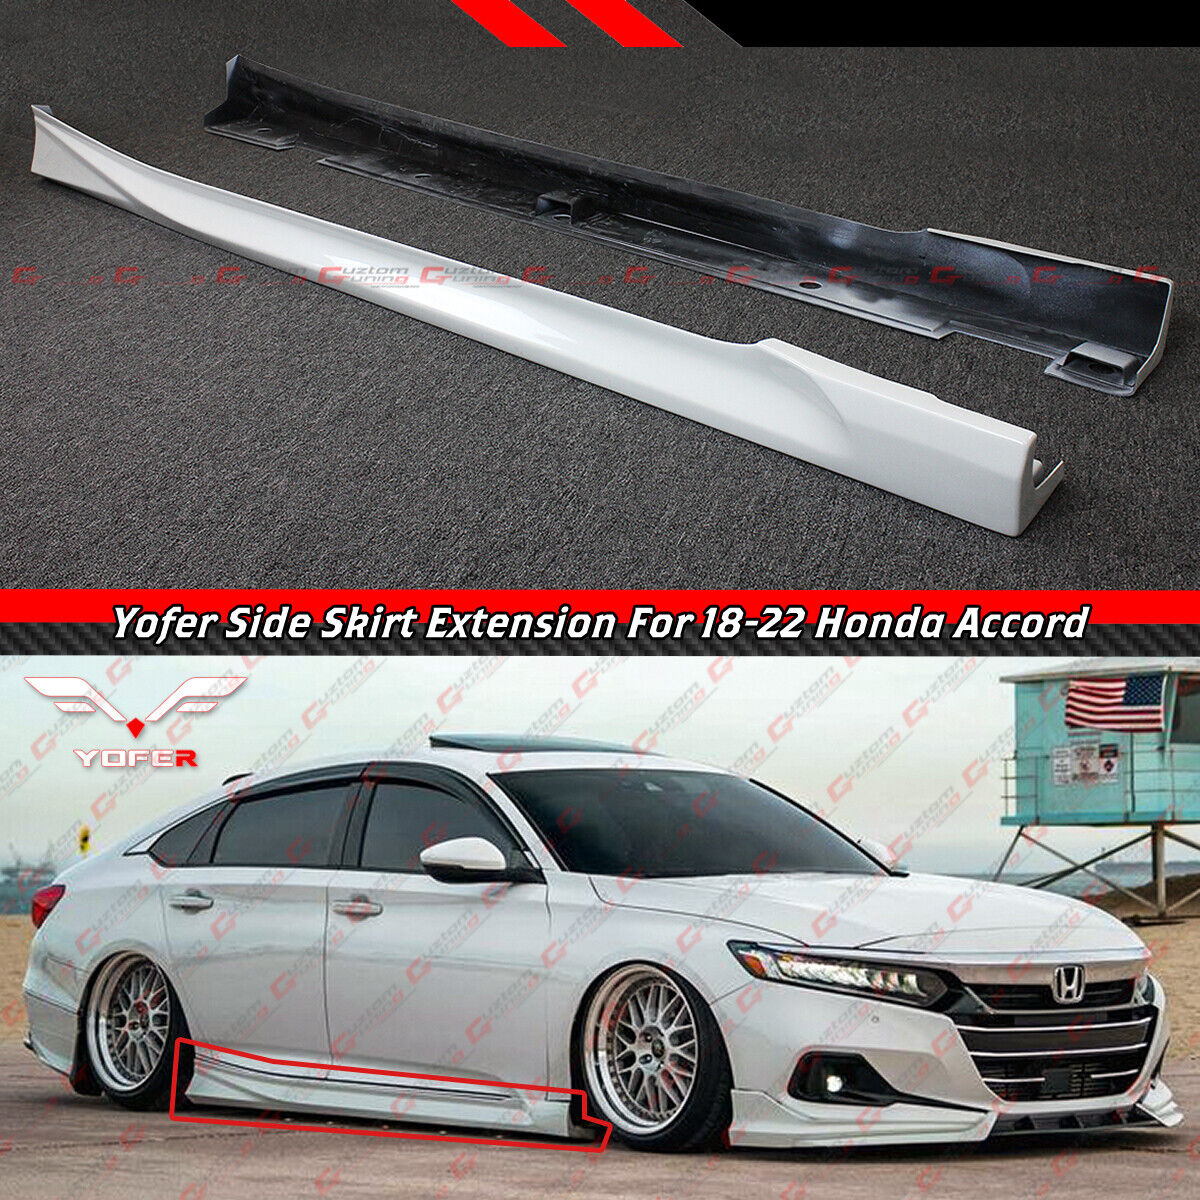 For 2018-22 Honda Accord Yofer Platinum White Pearl Add-on Side Skirt Extensions